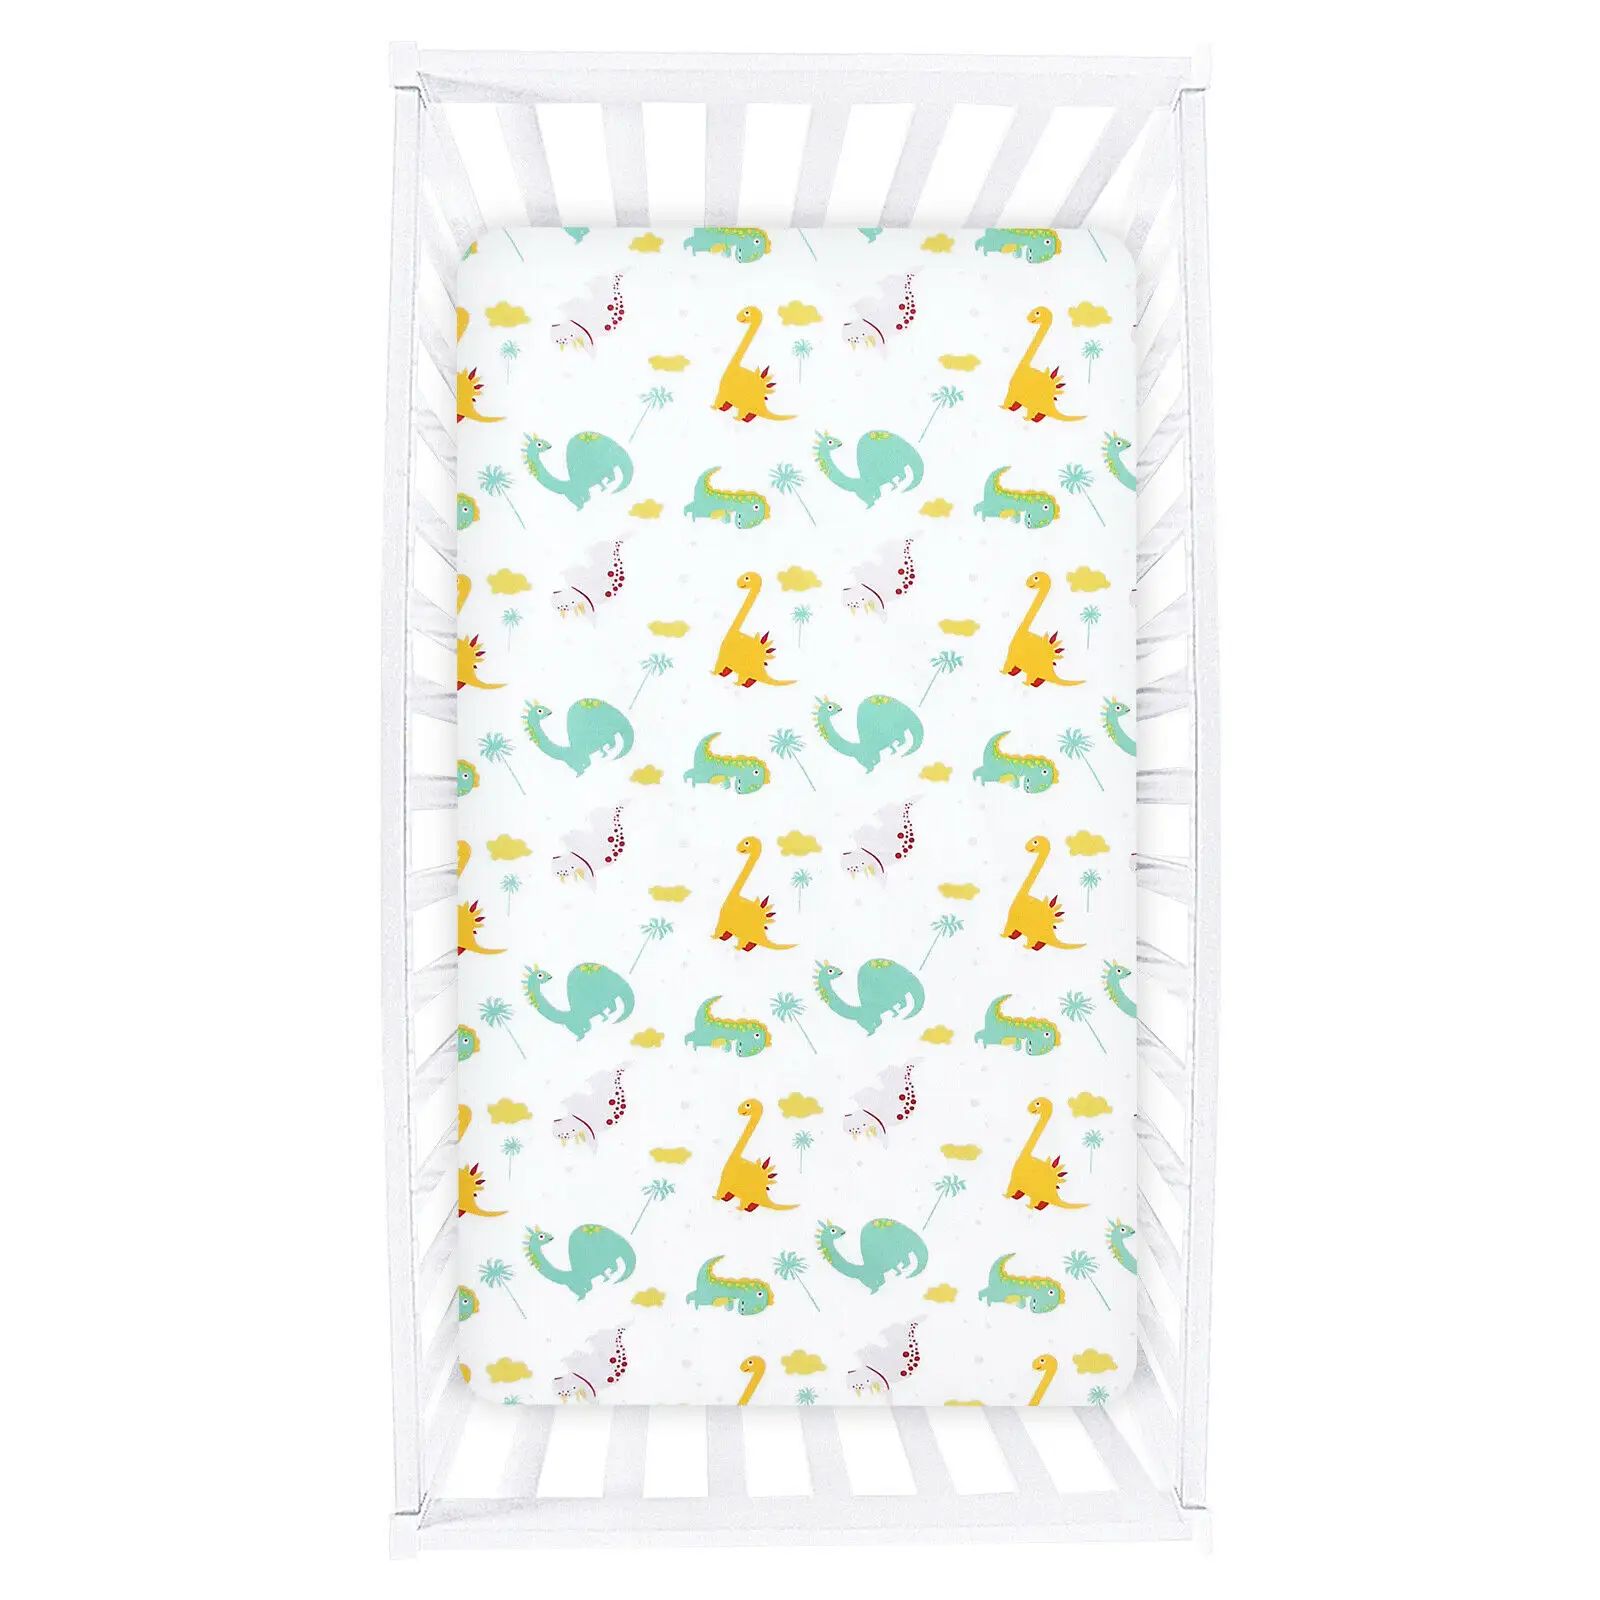 Custom Print Fitted Crib Sheet, 100% Organic Cotton Muslin Baby Crib Sheets for Standard Kid and Toddler Mattresses